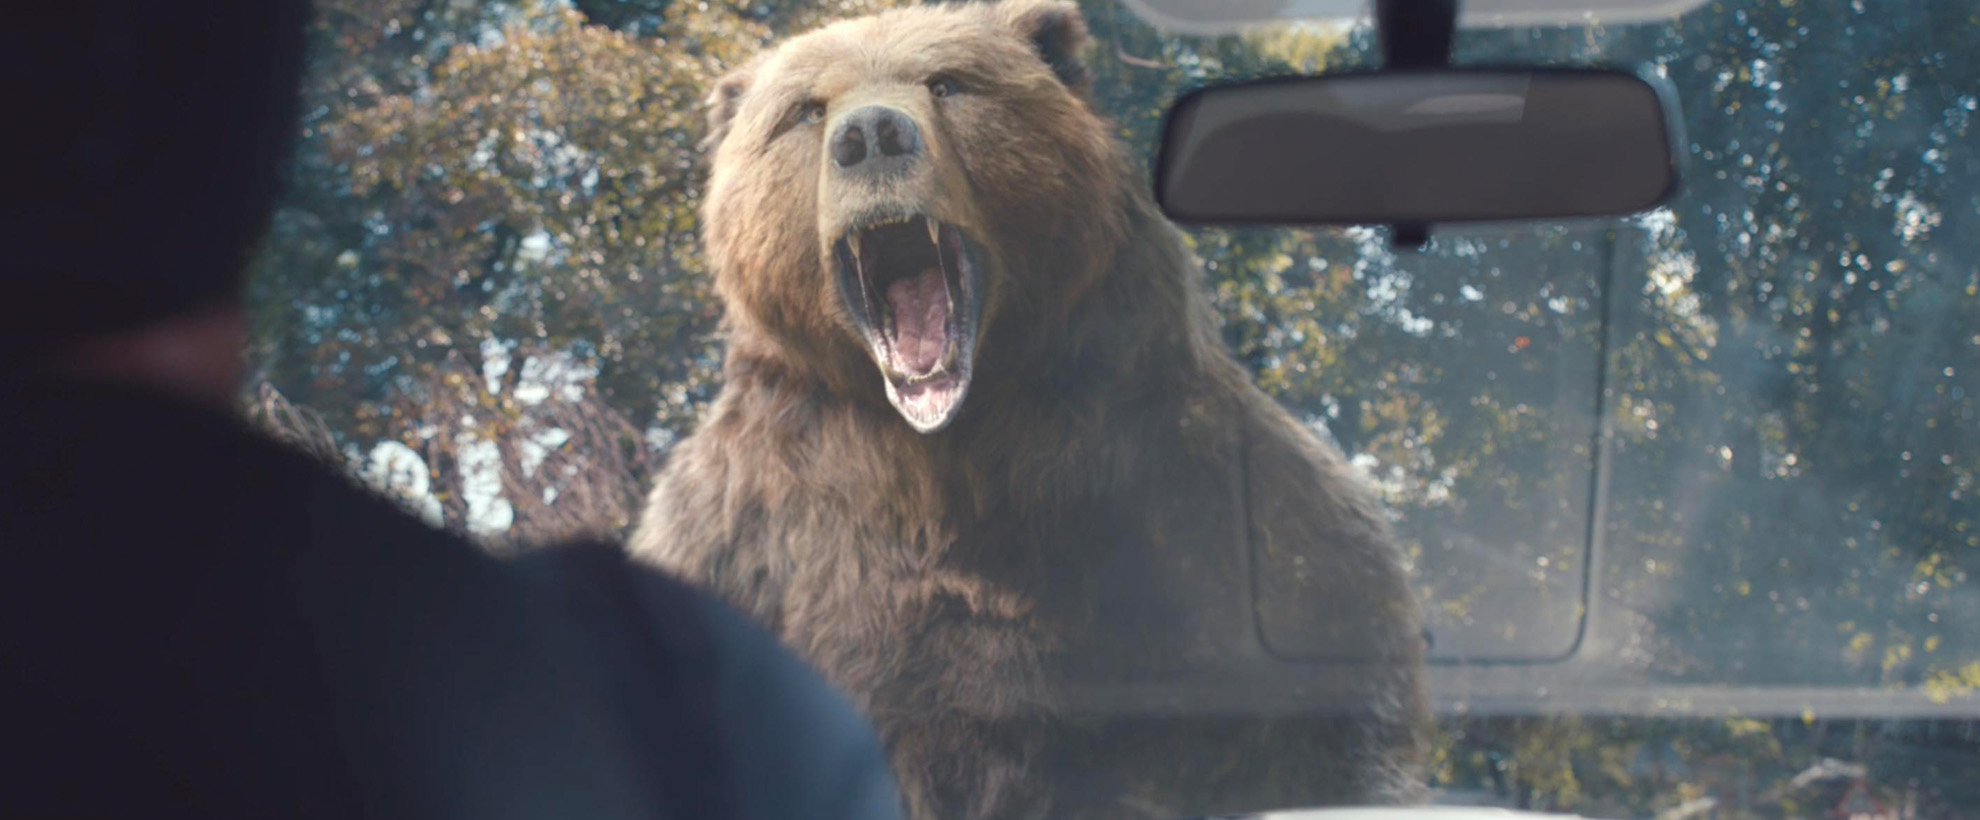 An angry bear stands on its hindlegs and roars at a person in a car